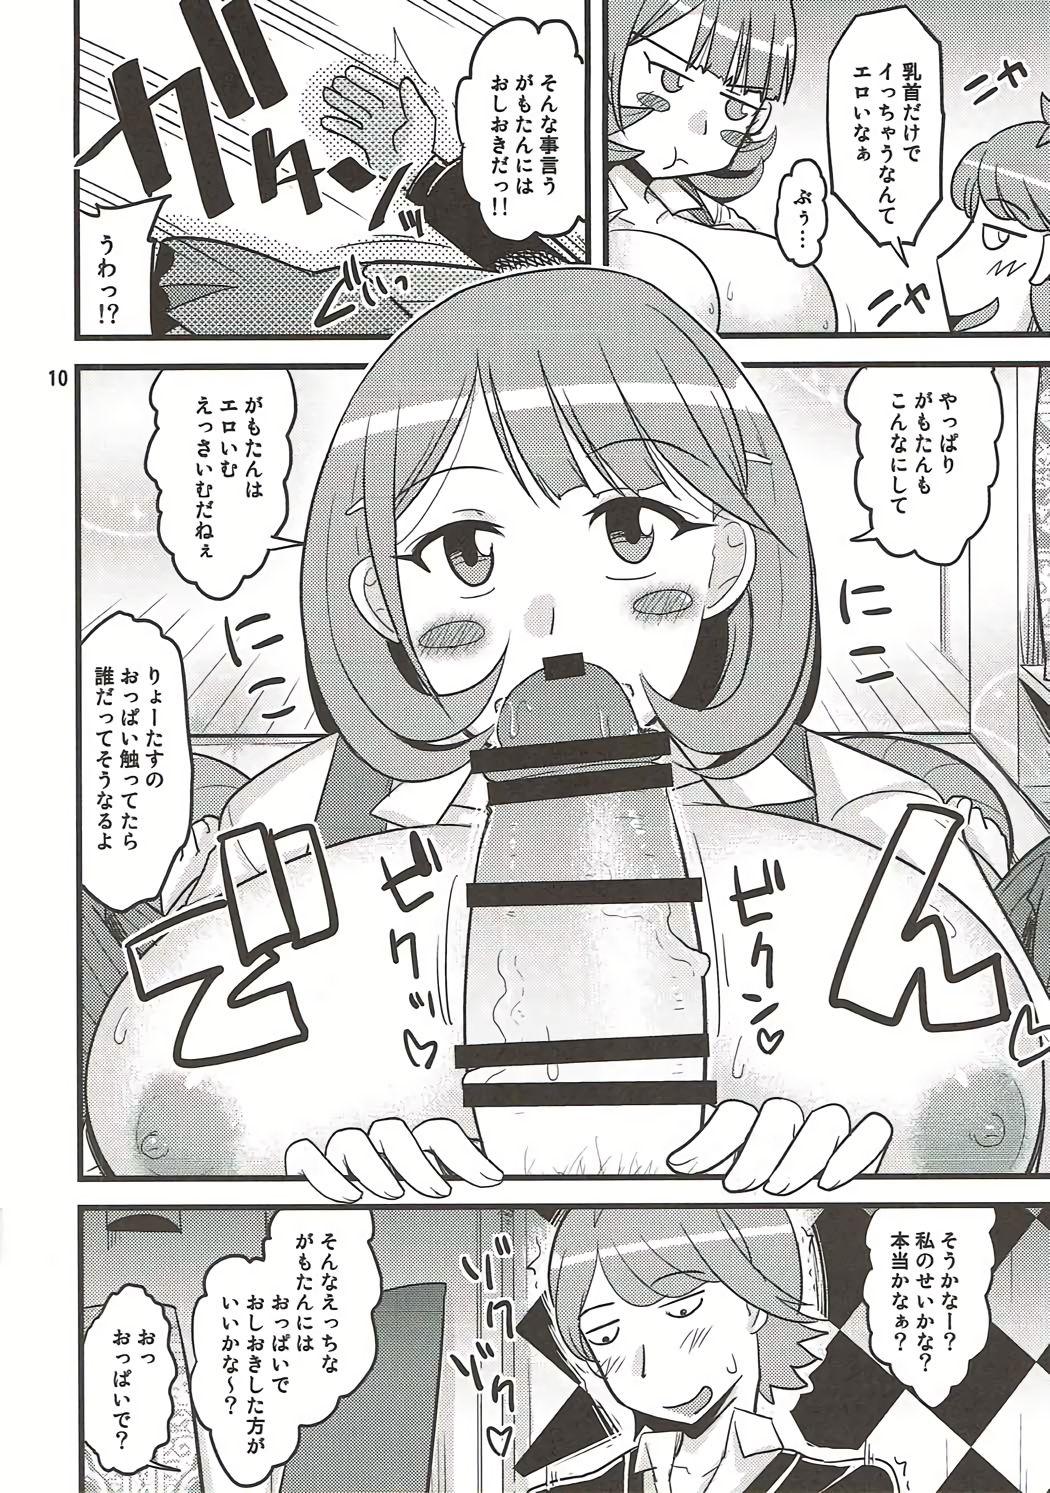 Big Pussy さおりん愛され日記 - Occultic nine T Girl - Page 9